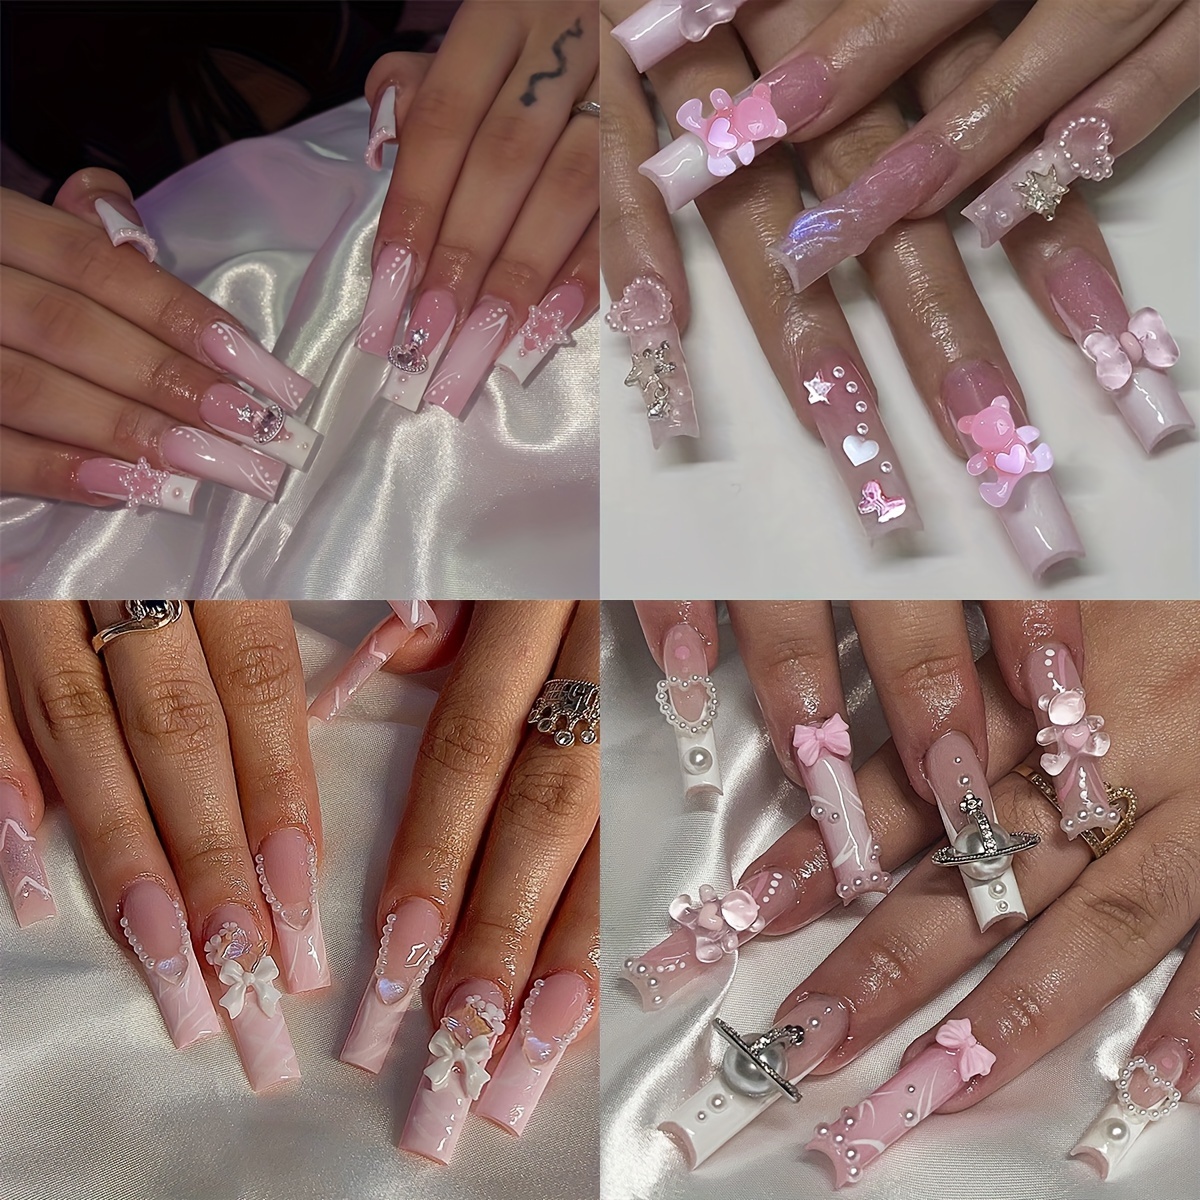 

4 Packs (96 Pcs) Glossy Pink Square Press On Nails, Long French Fake Nails With 3d Bow, Bear And Heart Pearl Design, Sweet Cool Y2k False Nails For Women Girls